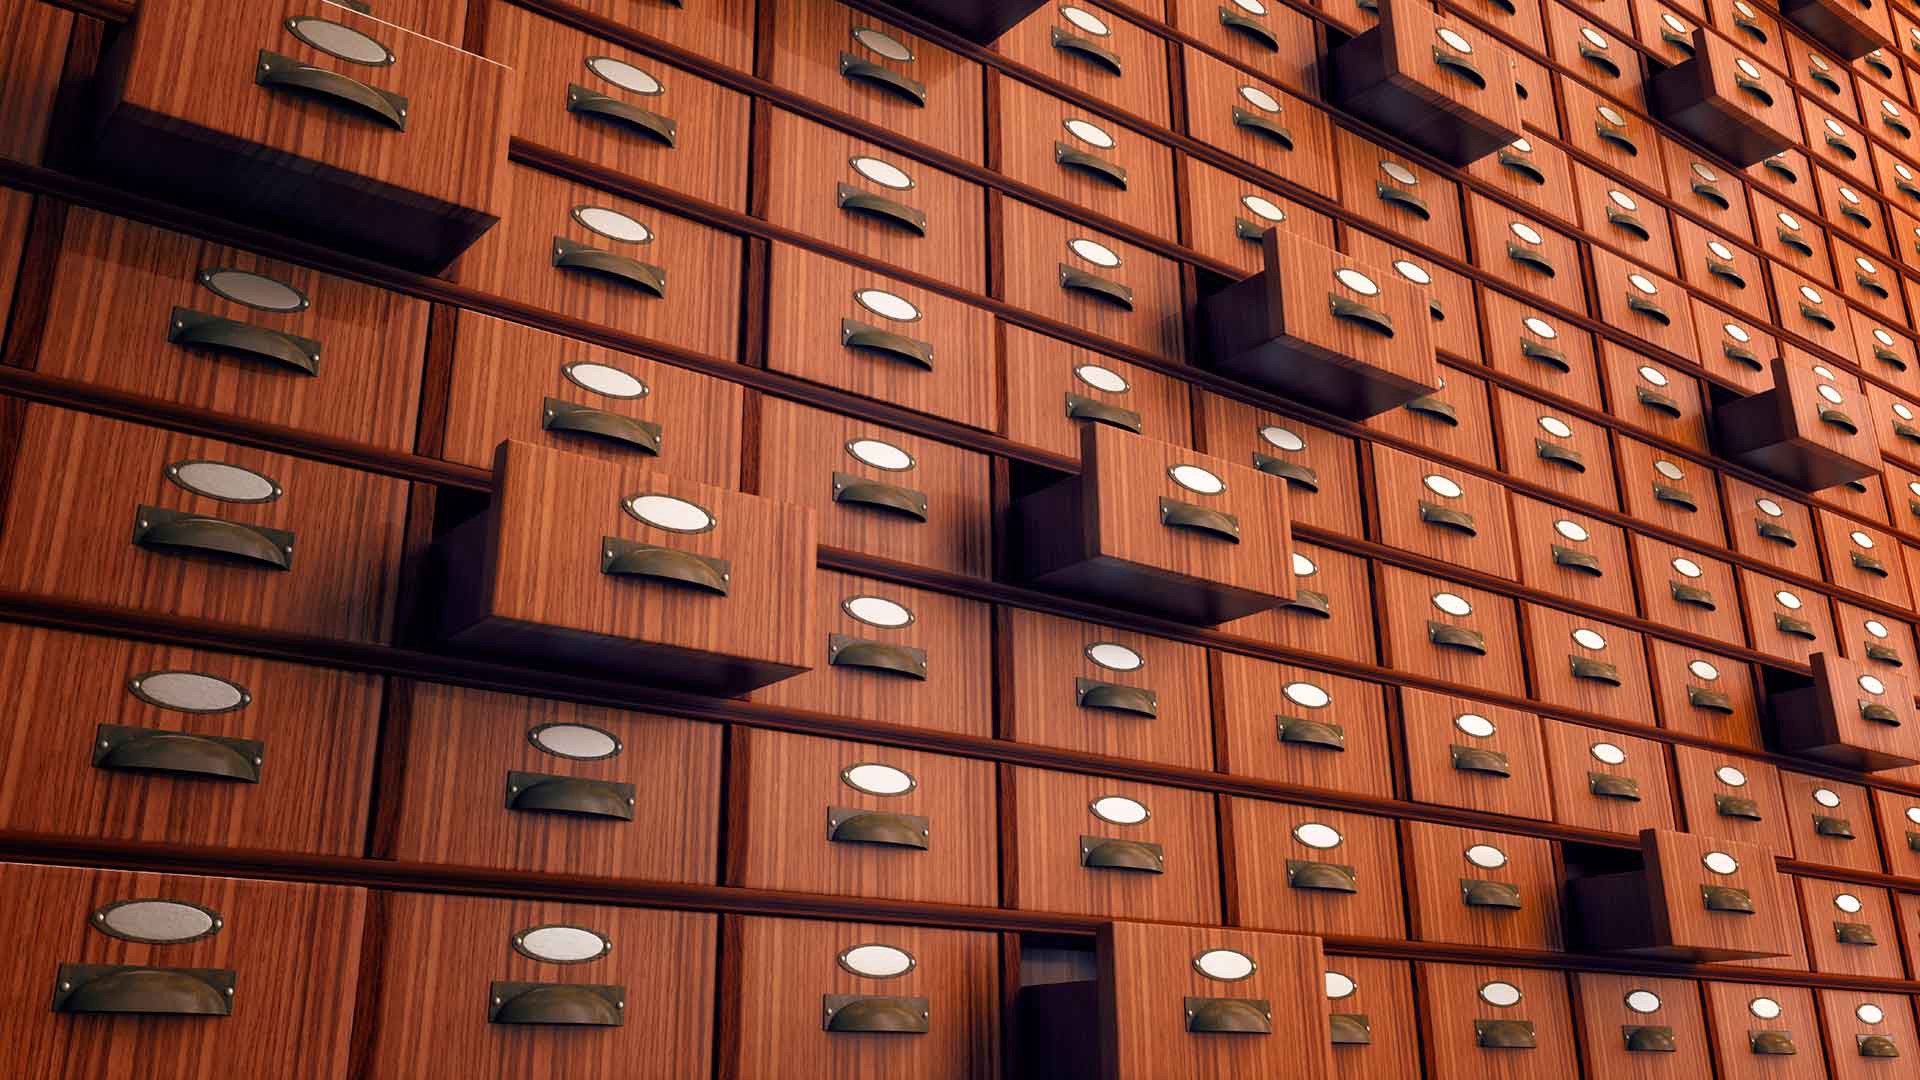 A cover image showing a grid of drawers that typically archive physical objects or notes.